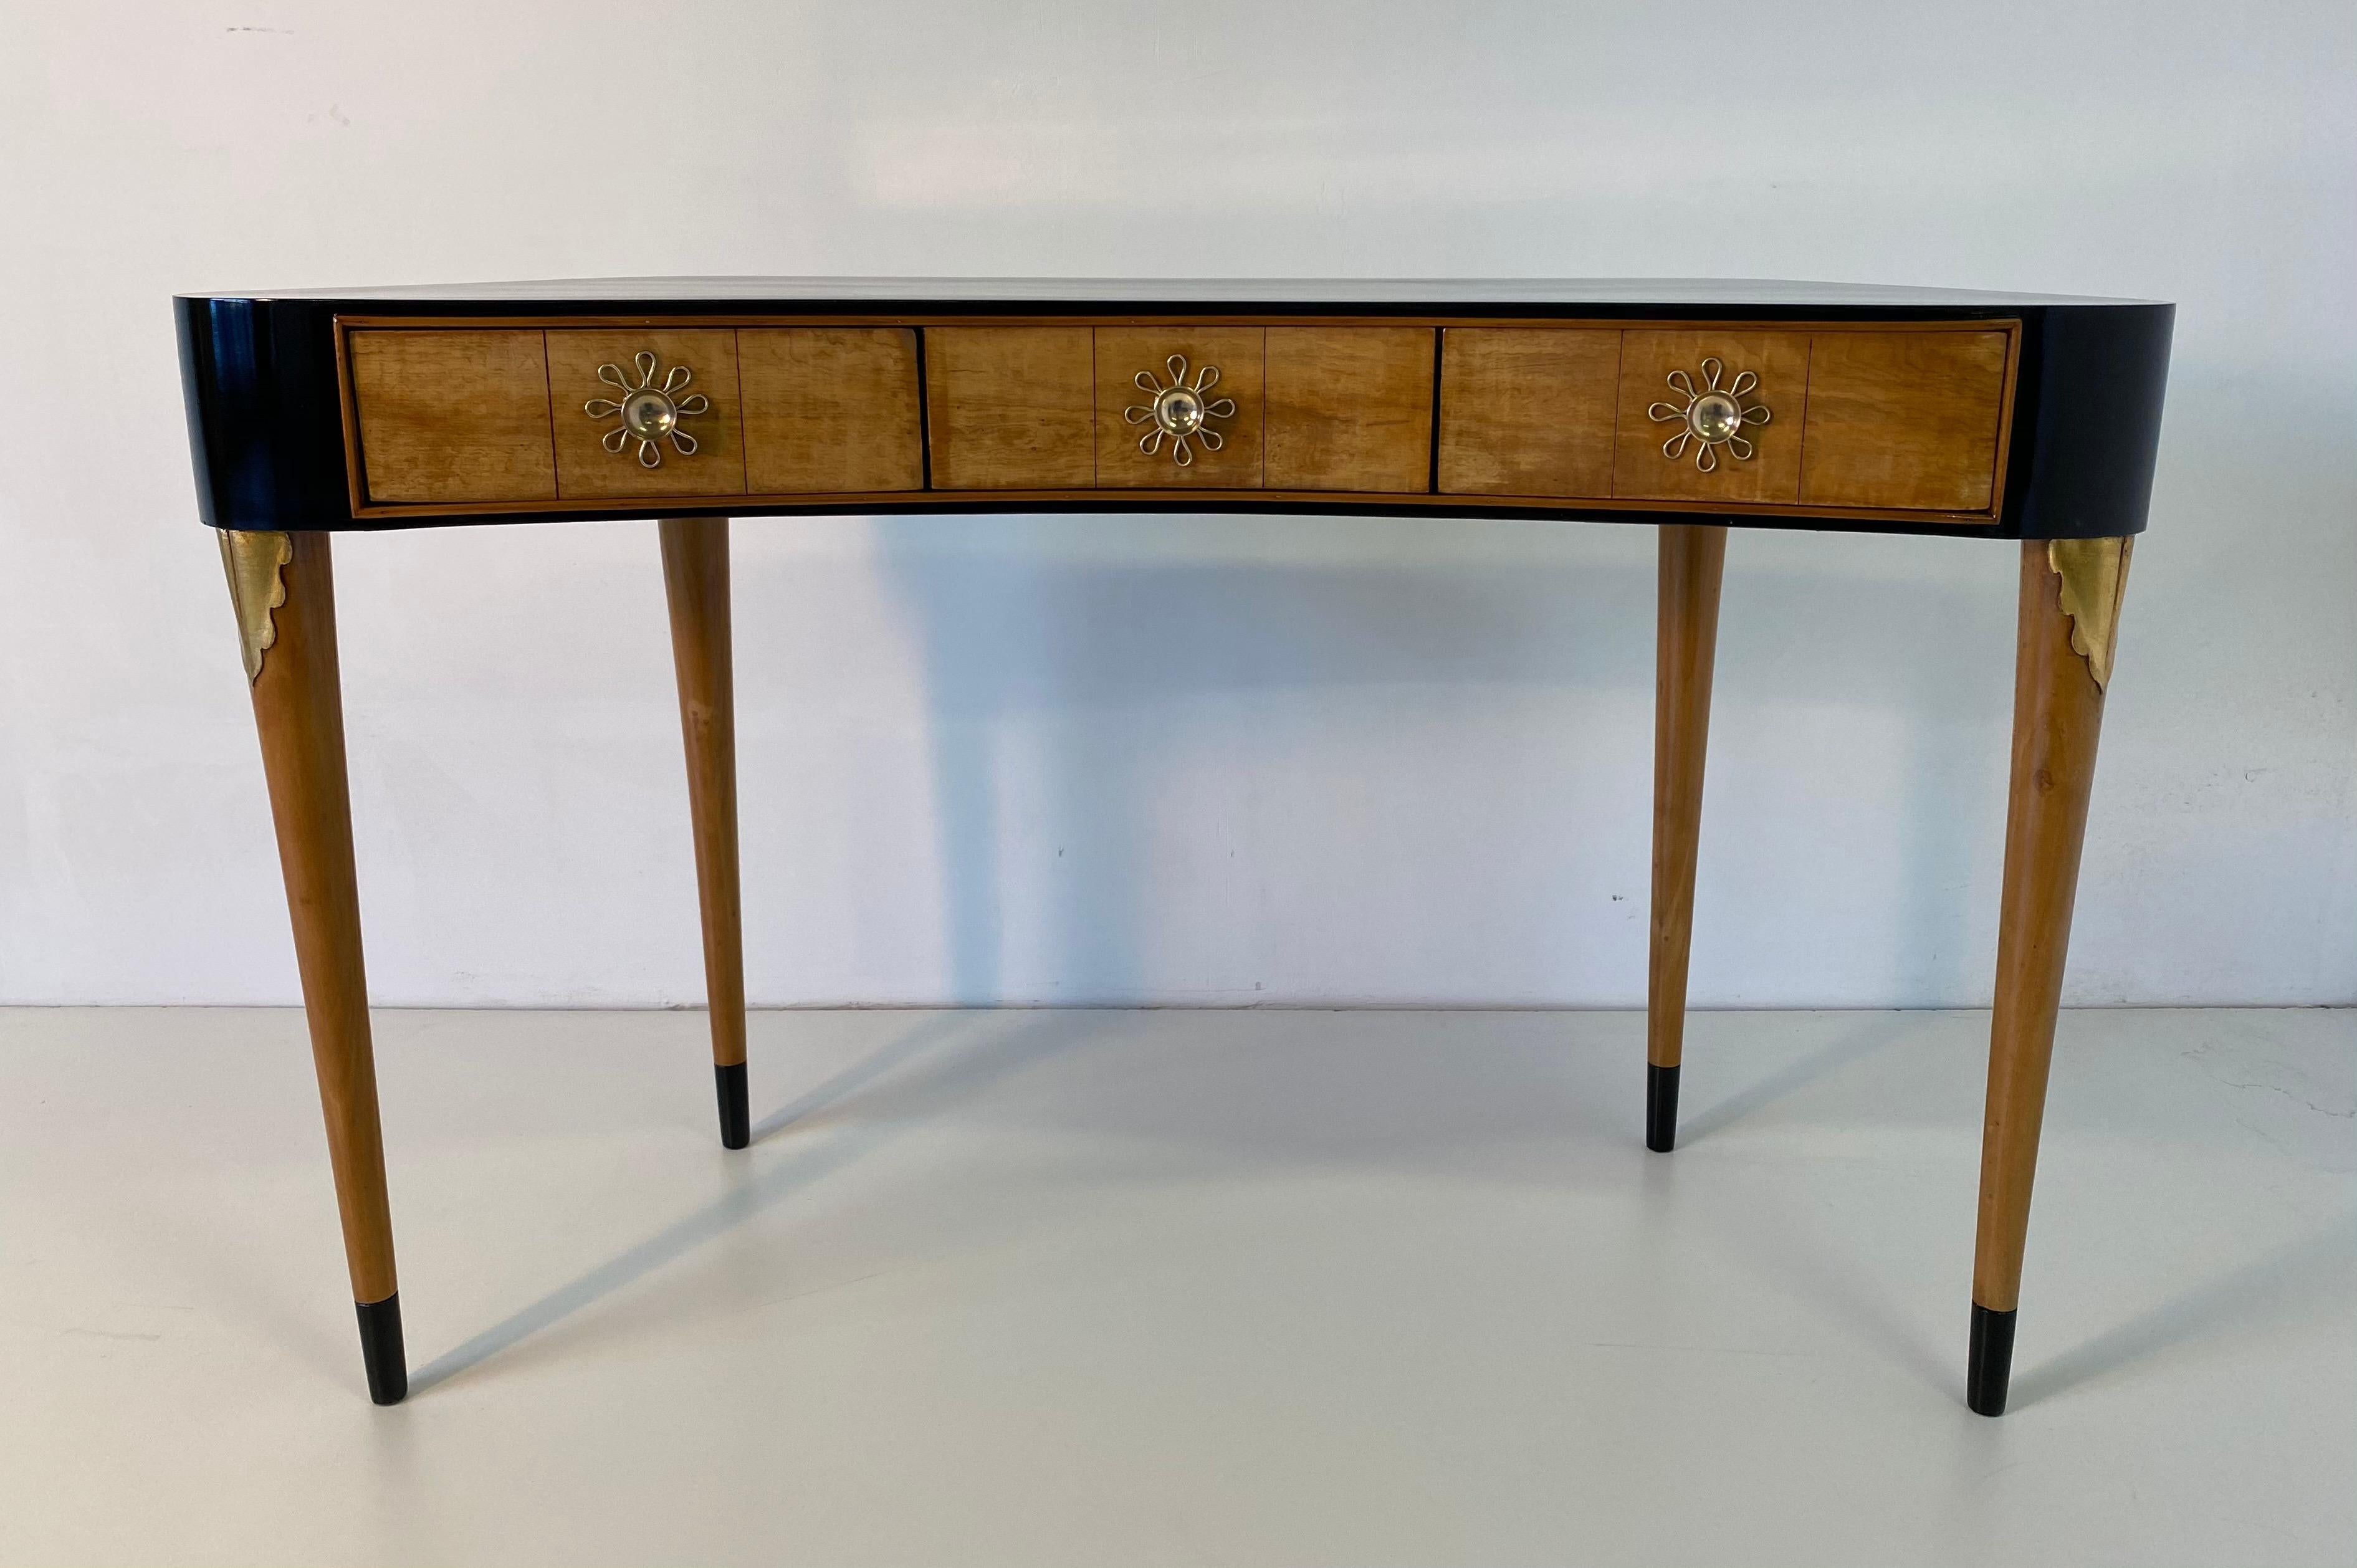 This small desk was produced in the 1940s in Italy, the legs are in solid maple with a carving covered in gold leaf.
The drawers are in ash while the top is black lacquered.
The precious handles are made of brass.
Completely restored.